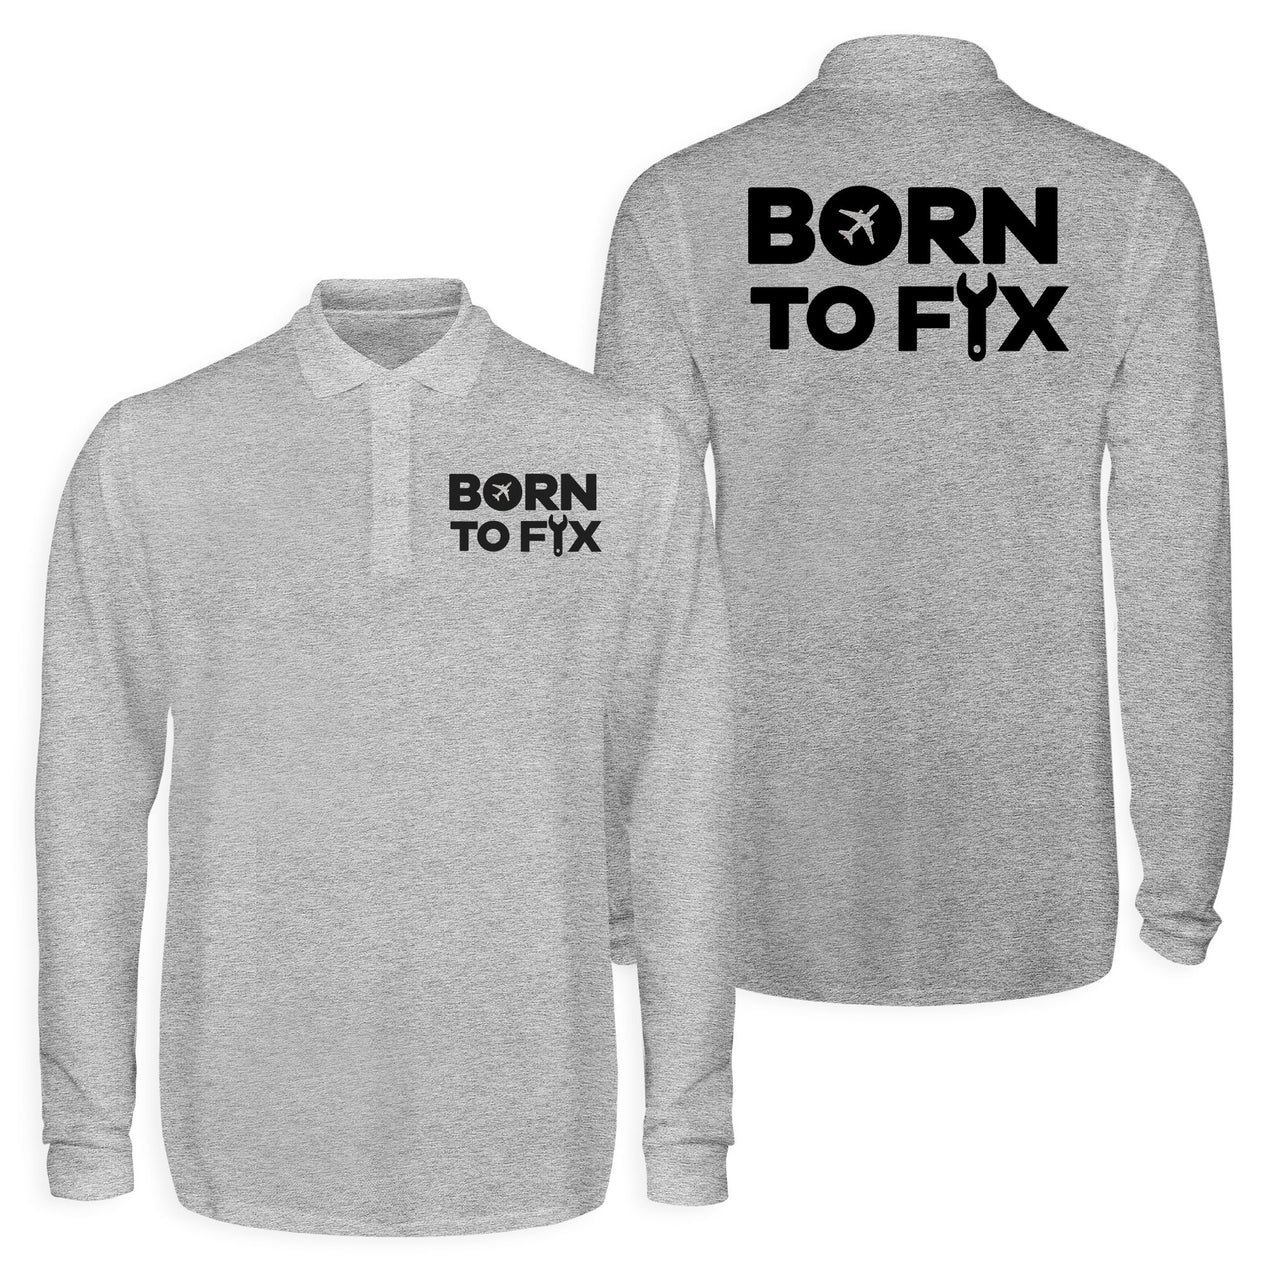 Born To Fix Airplanes Designed Long Sleeve Polo T-Shirts (Double-Side)